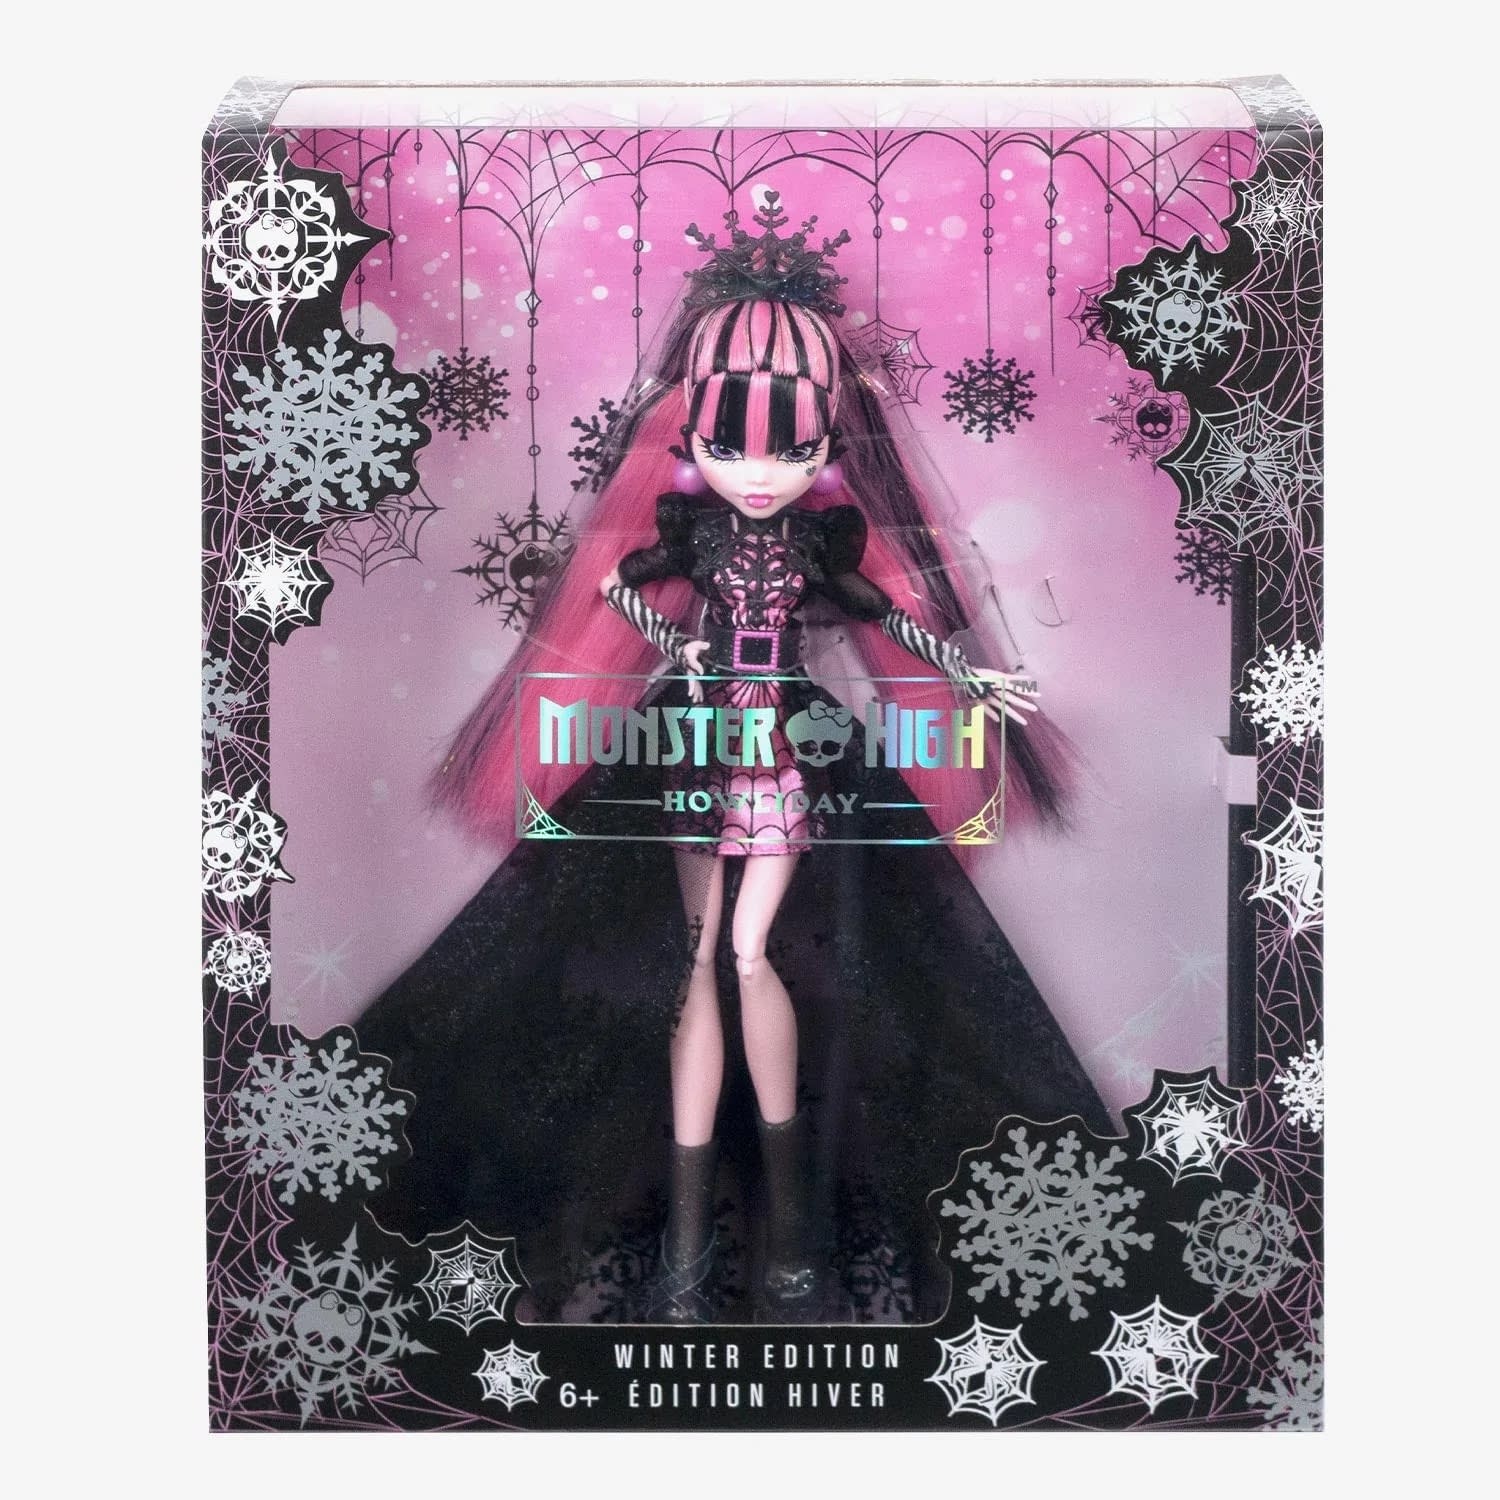 It's Season's Screamings with the Monster High Howliday Draculaura 